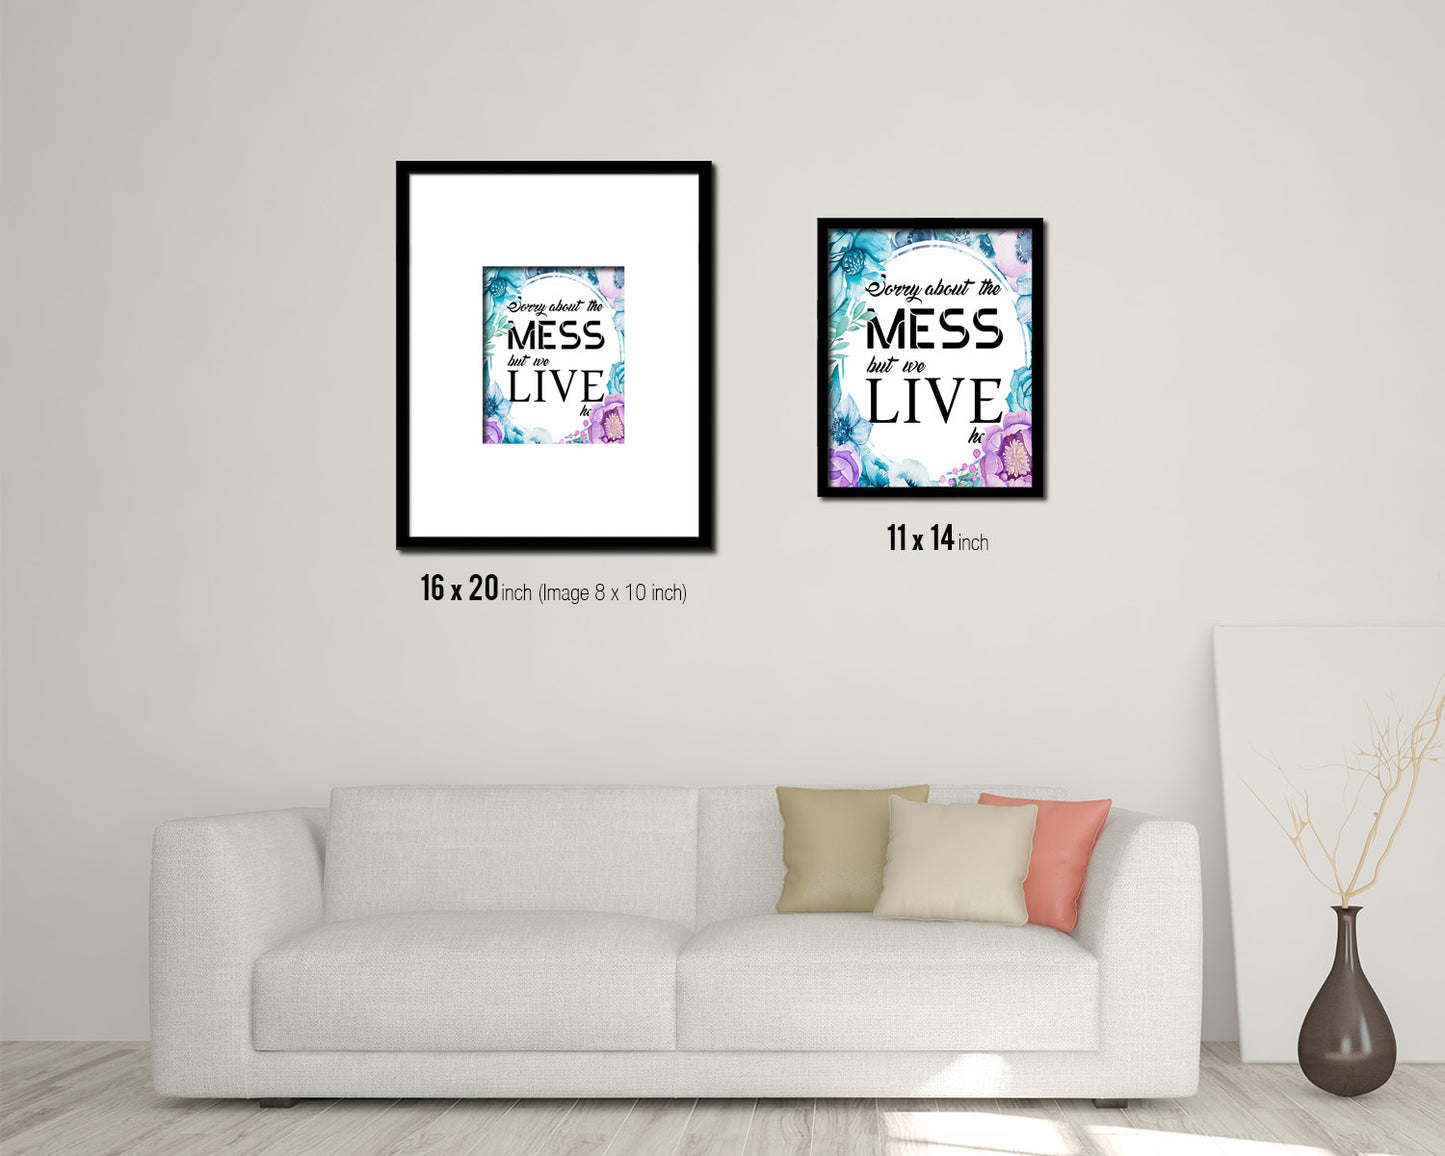 Sorry about the mess but we live here Quote Boho Flower Framed Print Wall Decor Art